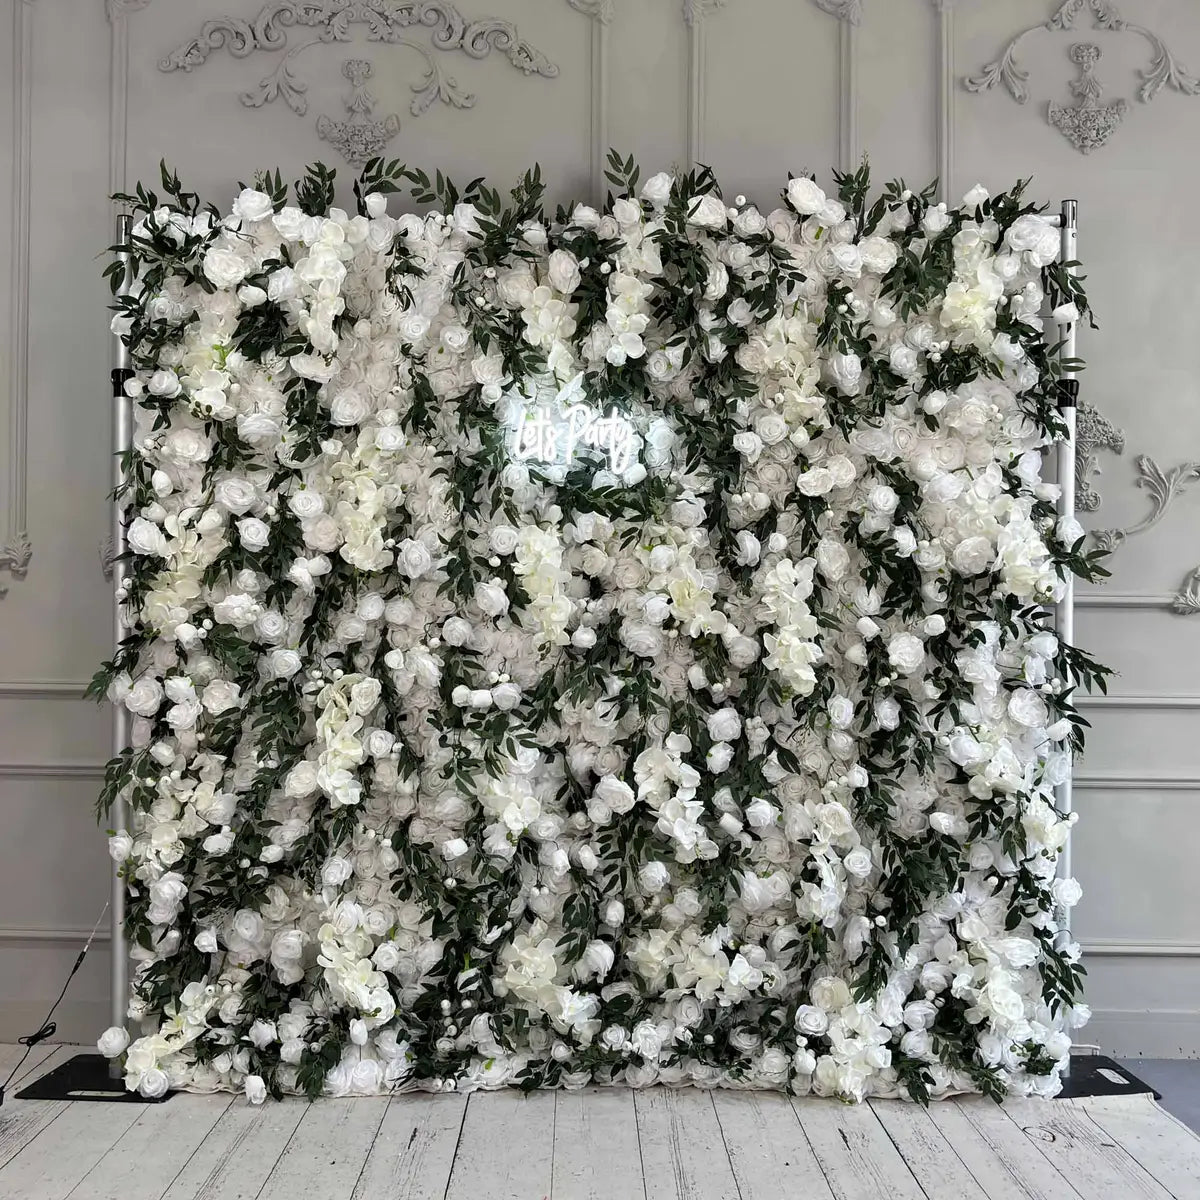 Flower Wall 3D Green & White Rose Fabric Rolling Up Curtain Floral Backdrop Wedding Party Proposal Decor